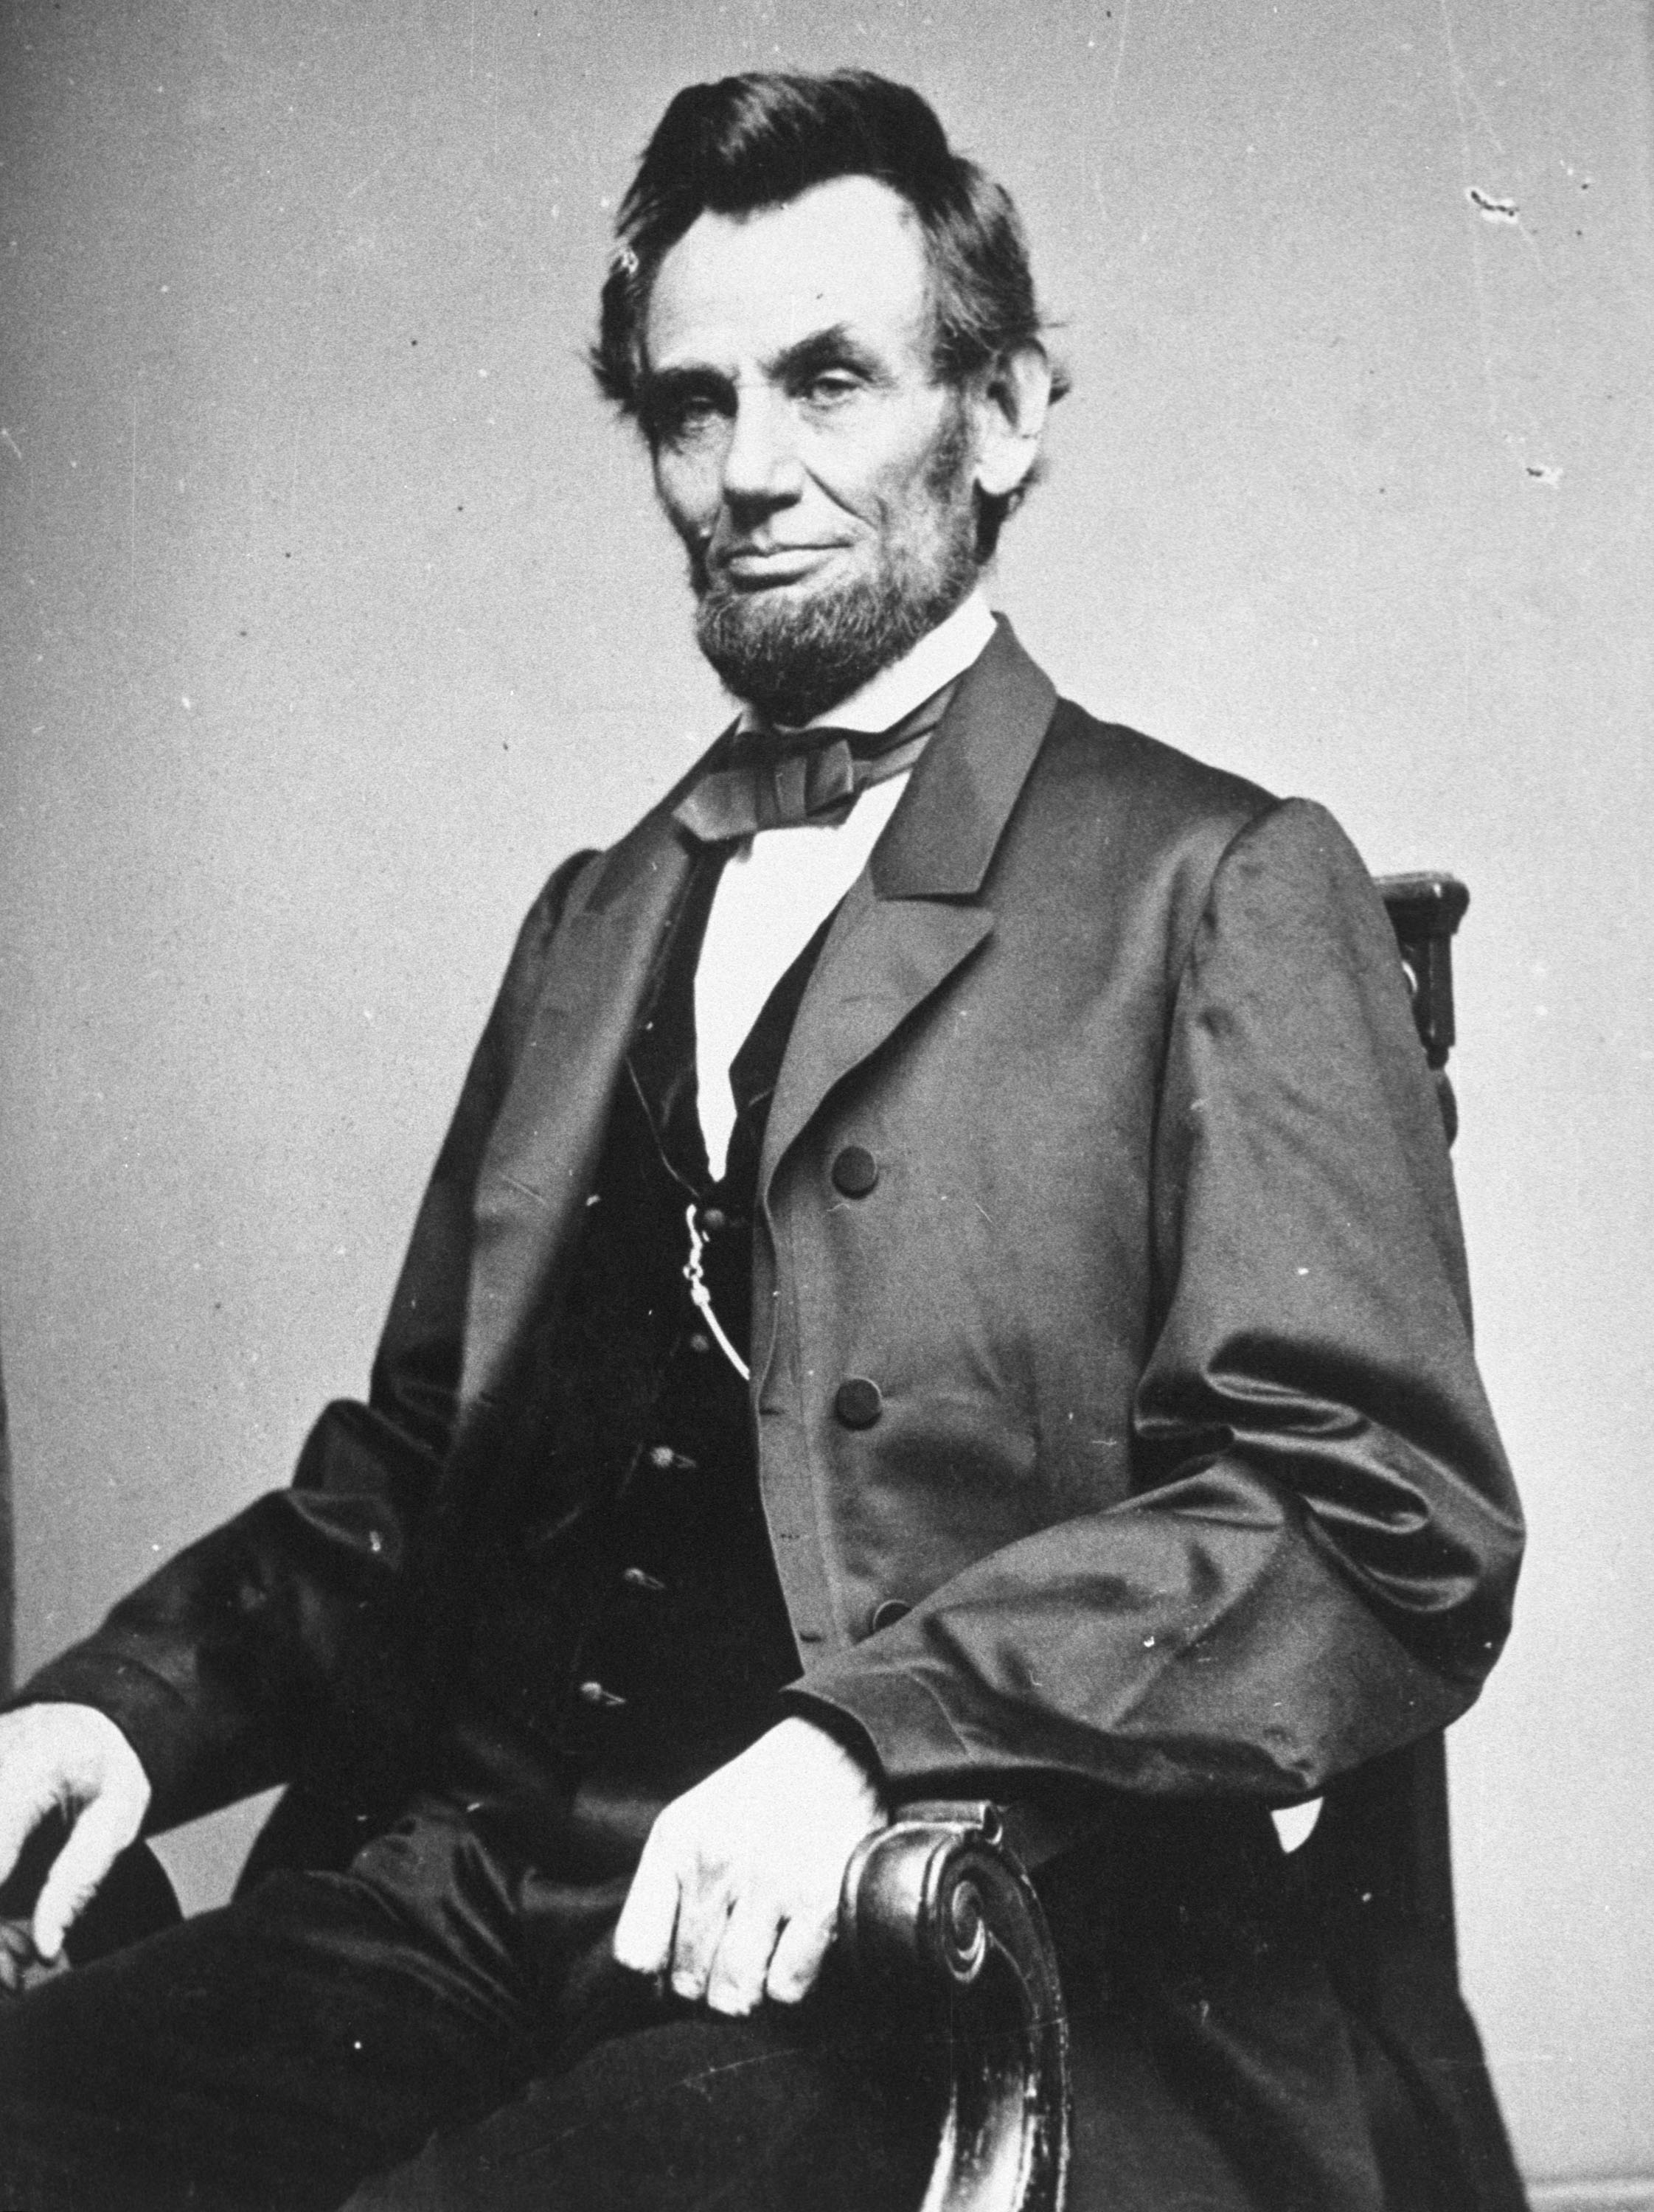 Lincoln might have freed the slaves, but he believed they should be sent to Africa or Central America and kept separate from white Americans